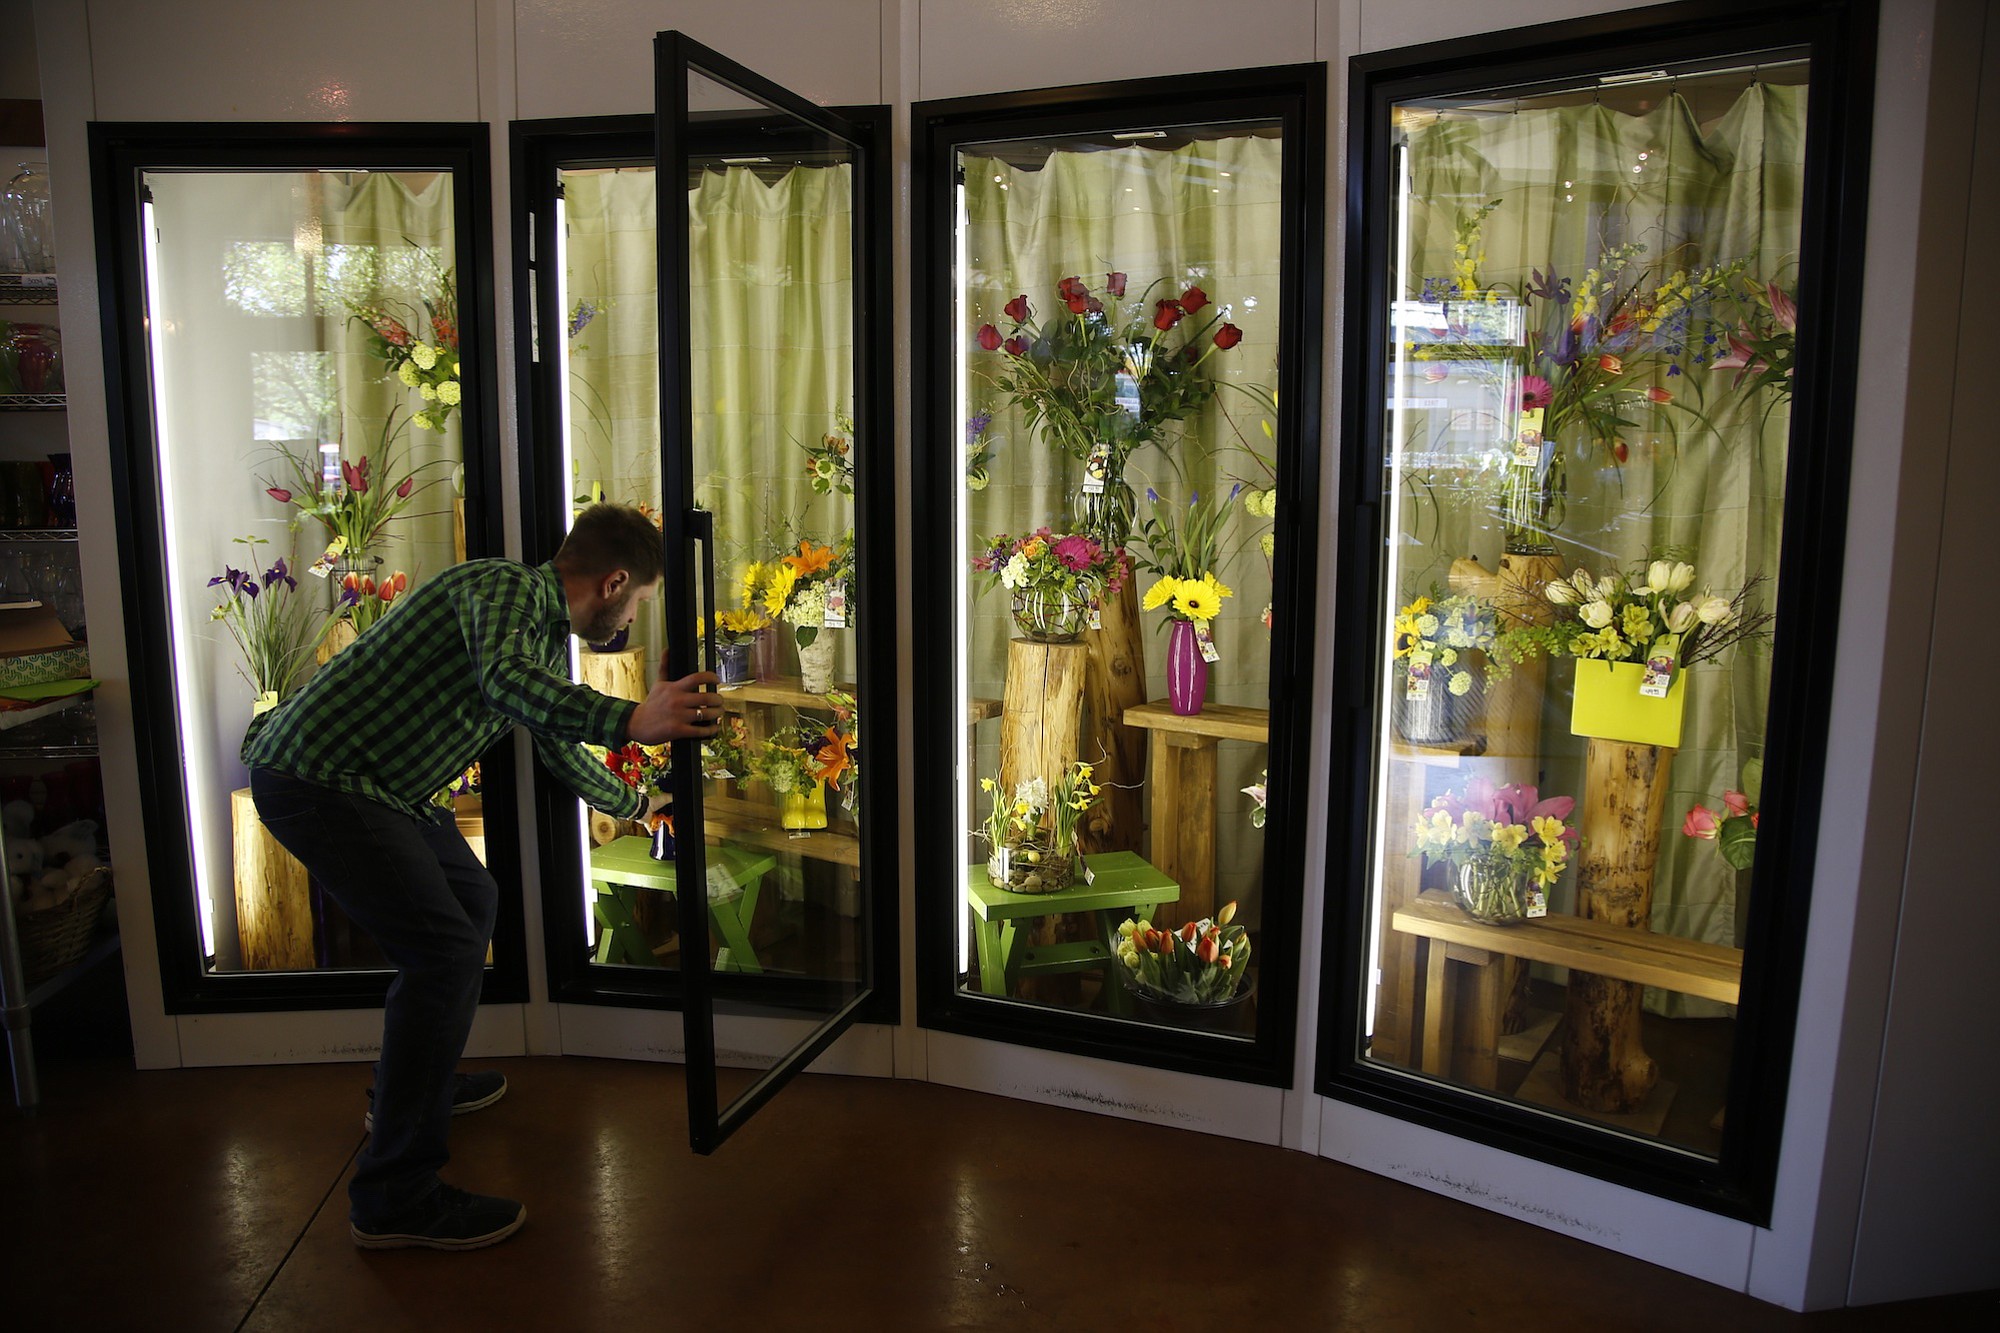 Erik Witcraft, general manager and lead designer at Flowers Washougal, works on a display at the store.